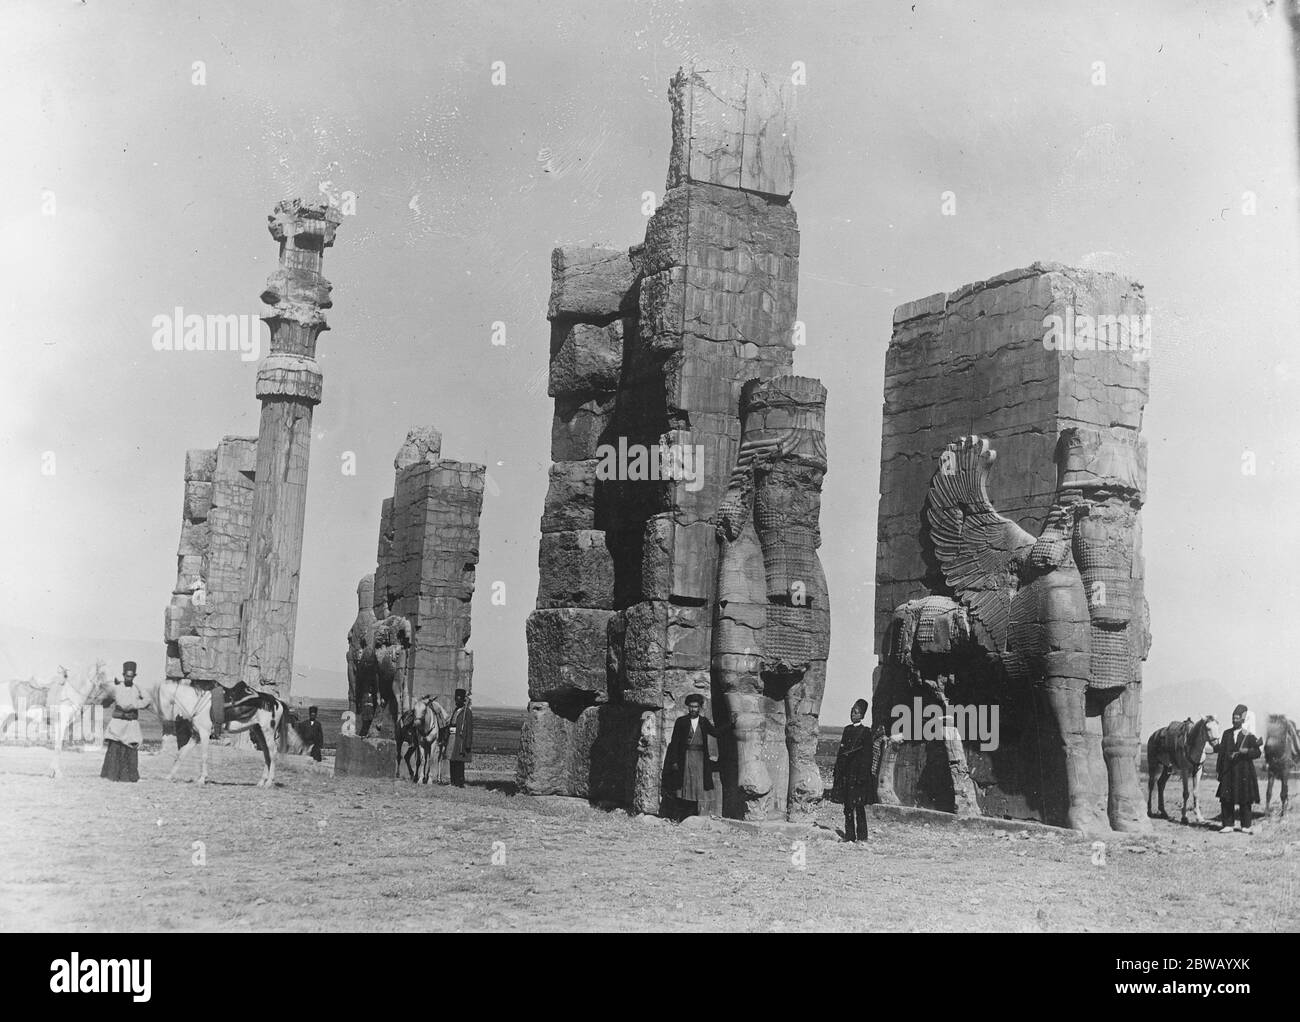 The great porch of Xerxes at Persepolis of Iran On the inside of this porch is inscribed within a diamond shaped frame ' H M Stanley New York Herald 1870 ' together with several other names 1919 Stock Photo